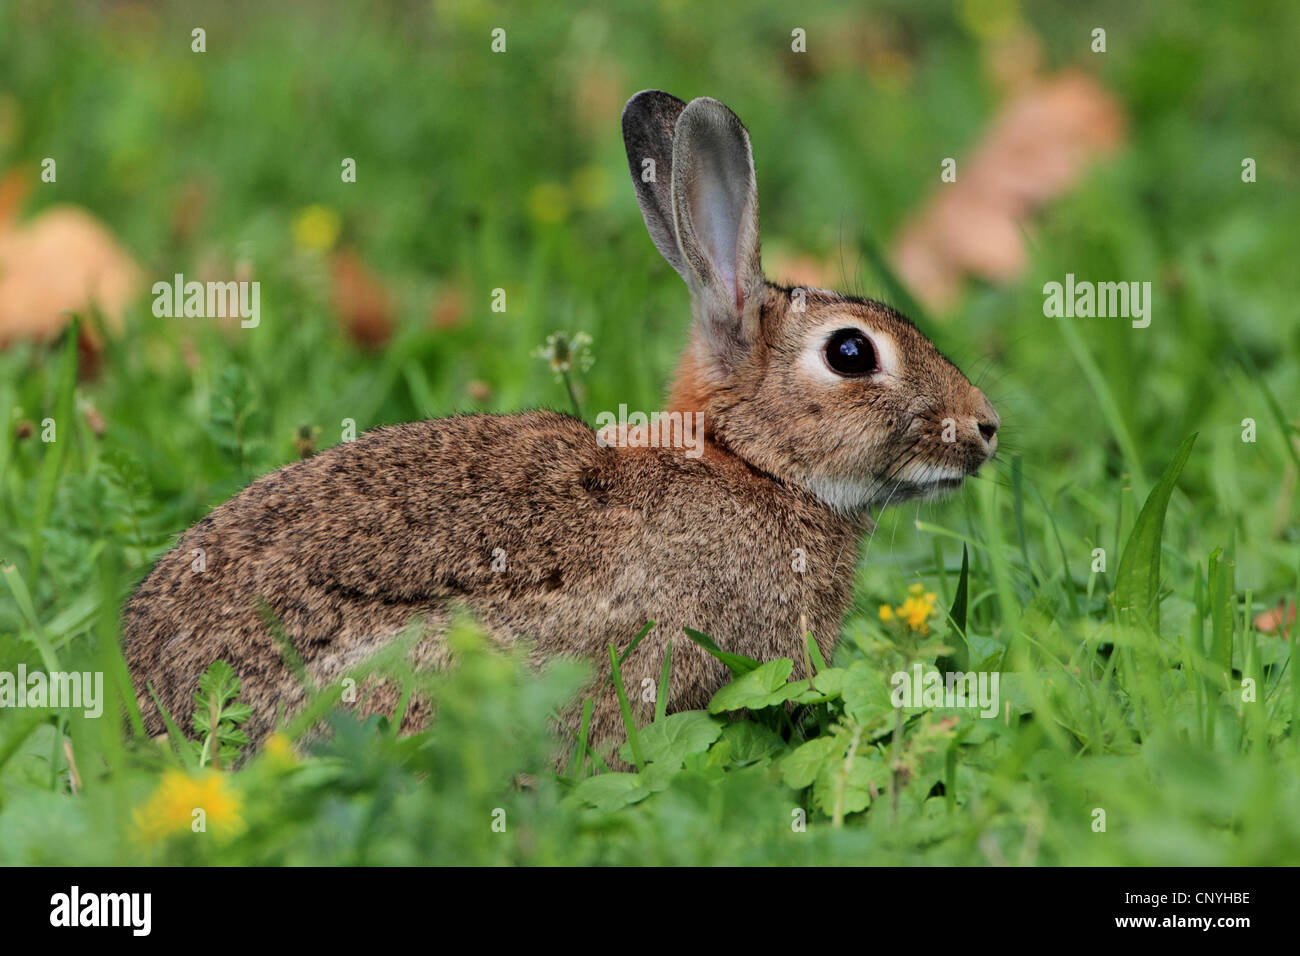 European rabbit (Oryctolagus cuniculus), sitting in grass, Germany Stock Photo